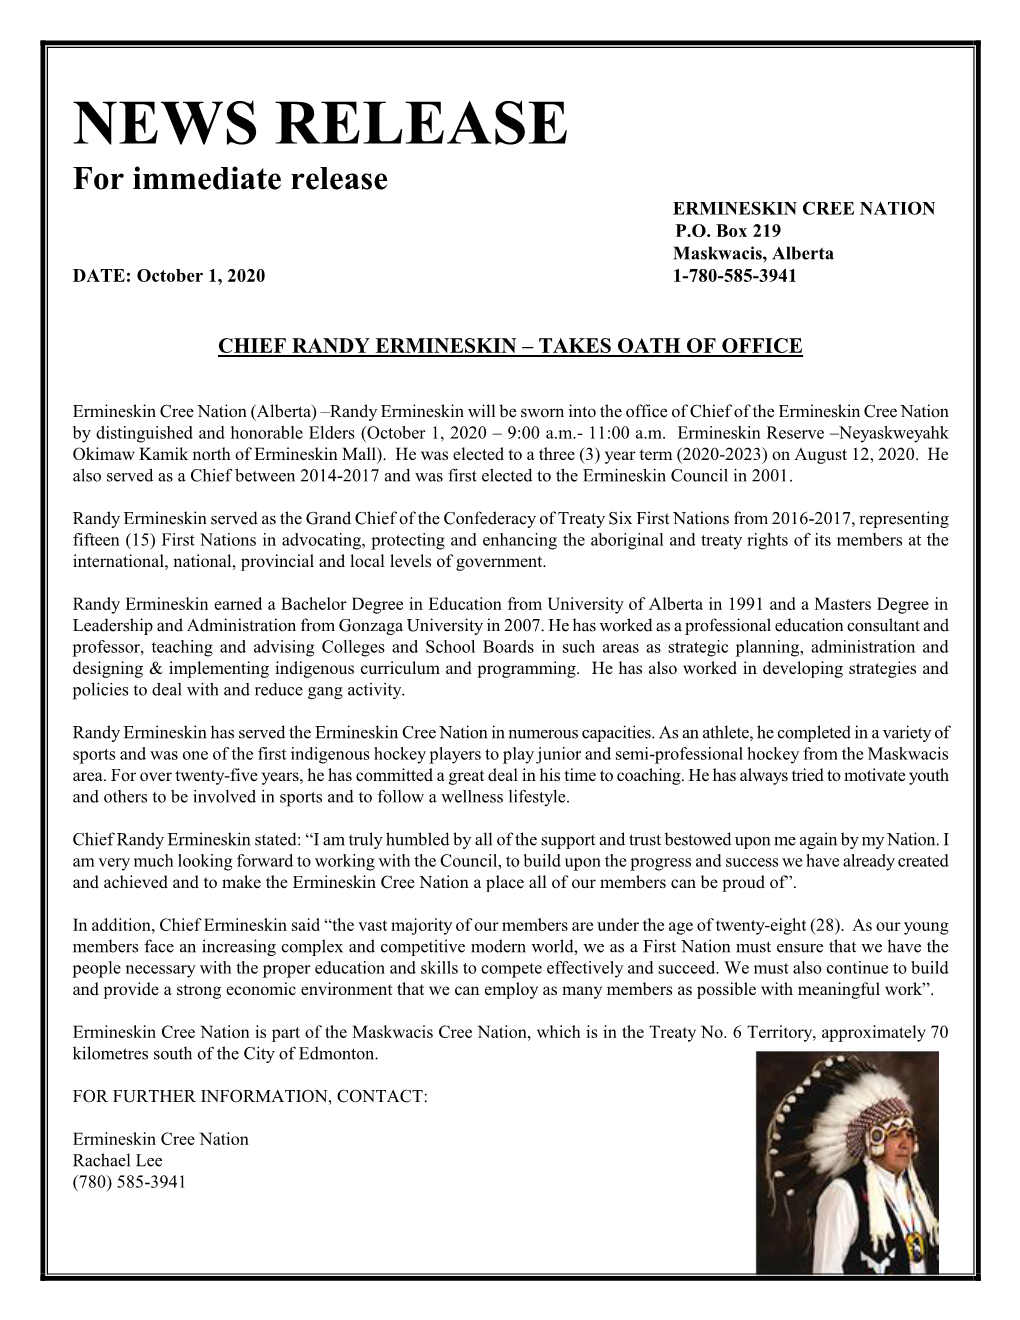 NEWS RELEASE for Immediate Release ERMINESKIN CREE NATION P.O